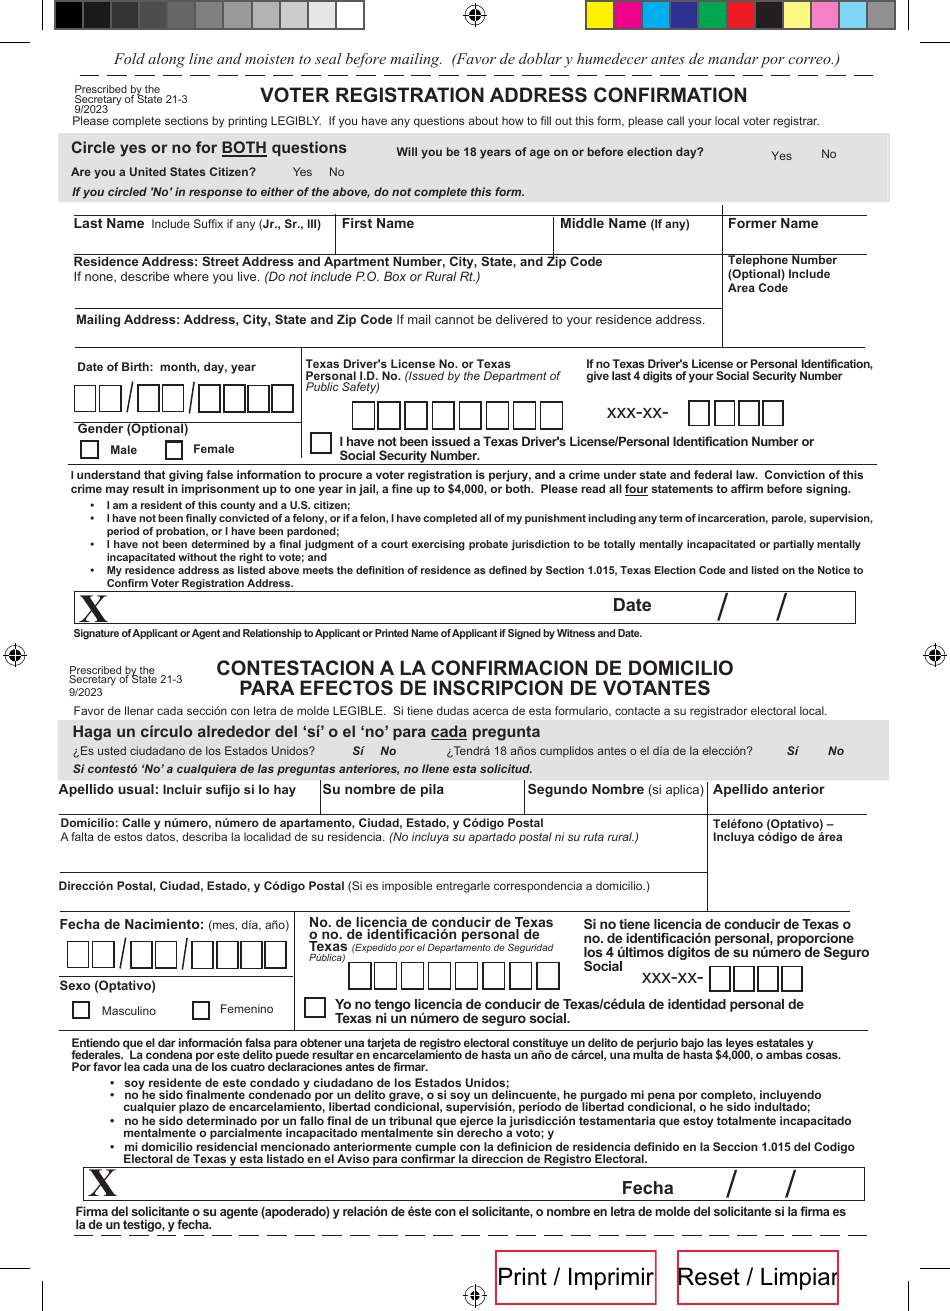 Form 21-3 Notice to Confirm Voter Registration Address-fold Over - Texas (English / Spanish), Page 1